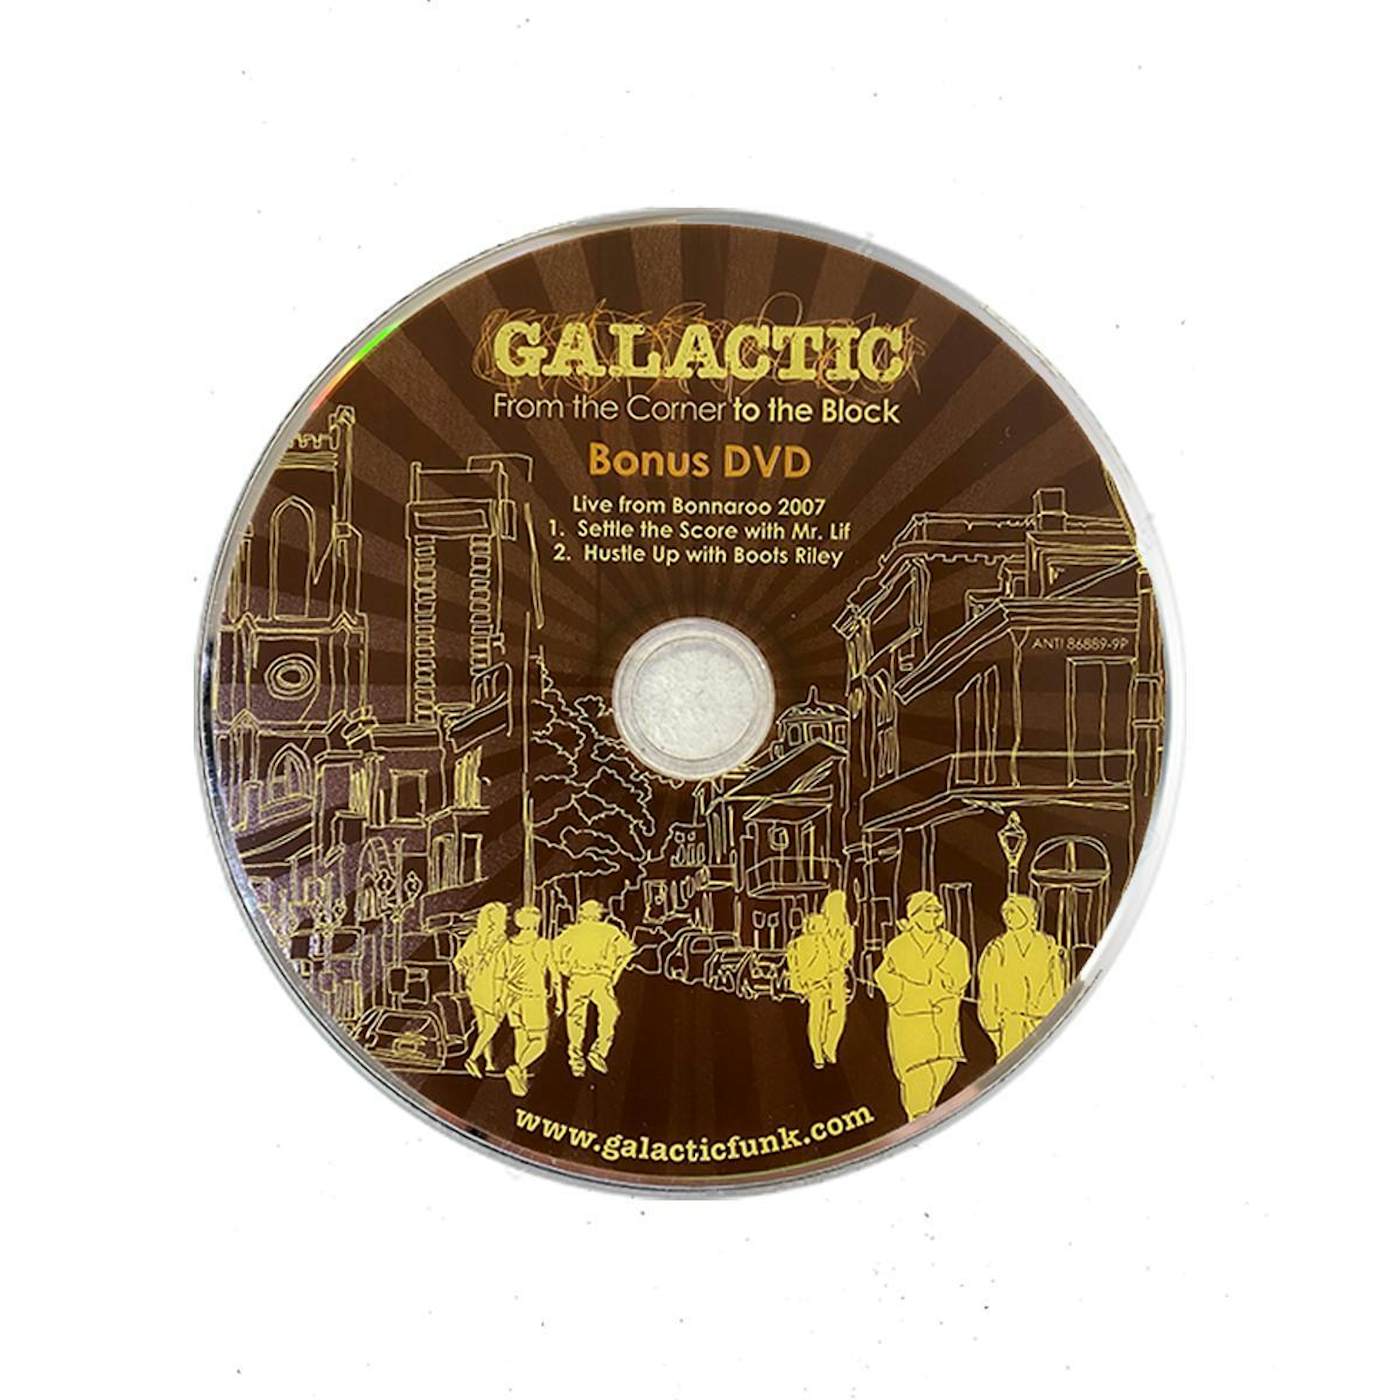 Galactic From the Corner to the Block DVD